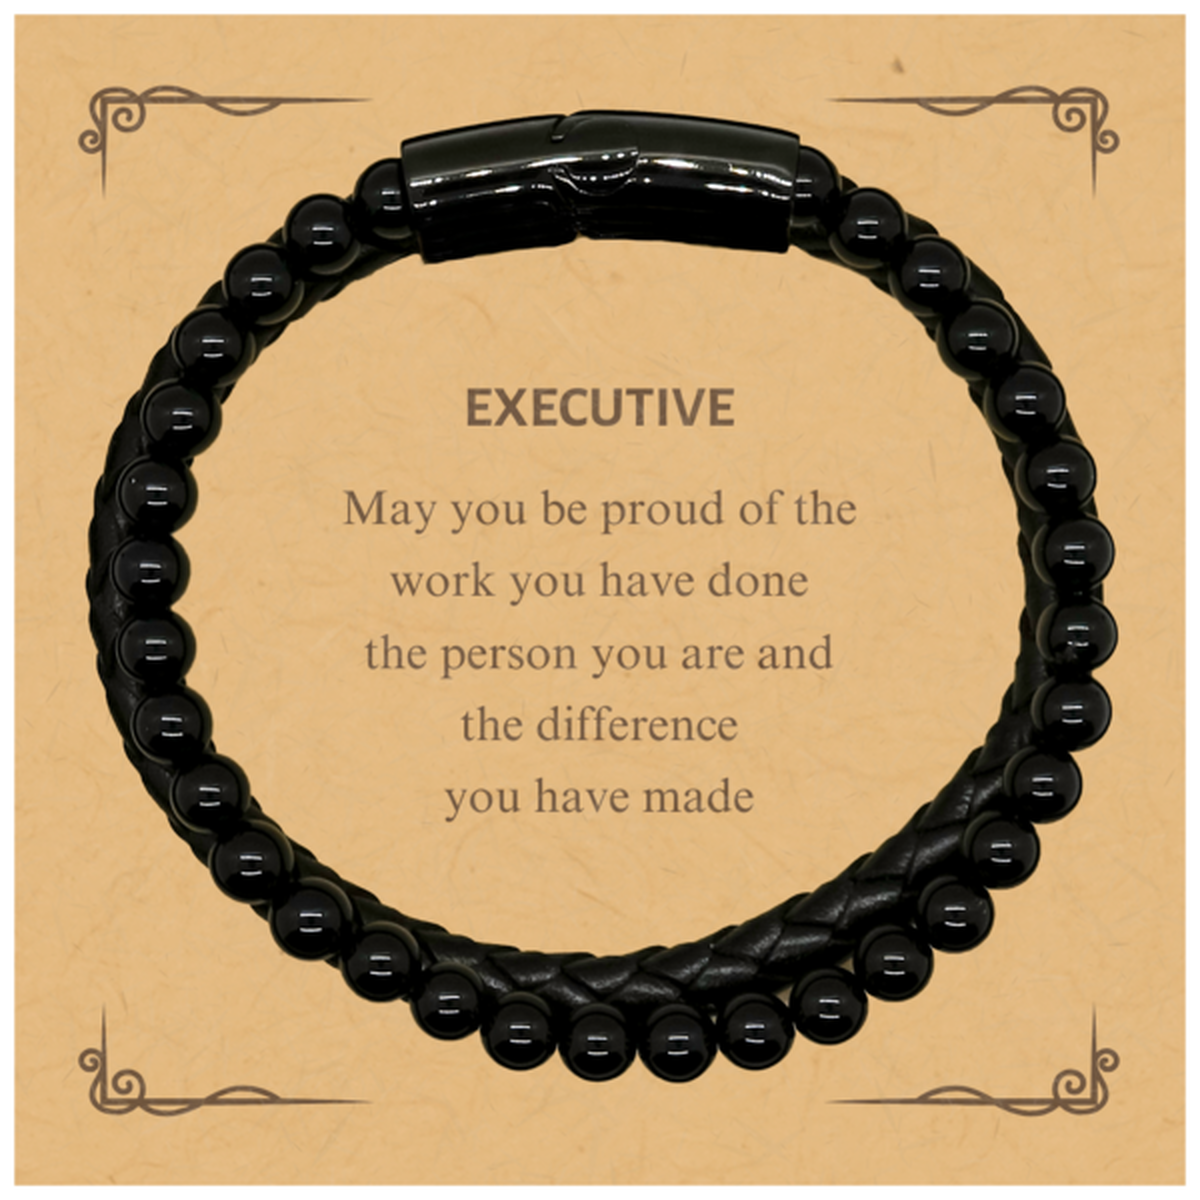 Executive May you be proud of the work you have done, Retirement Executive Stone Leather Bracelets for Colleague Appreciation Gifts Amazing for Executive